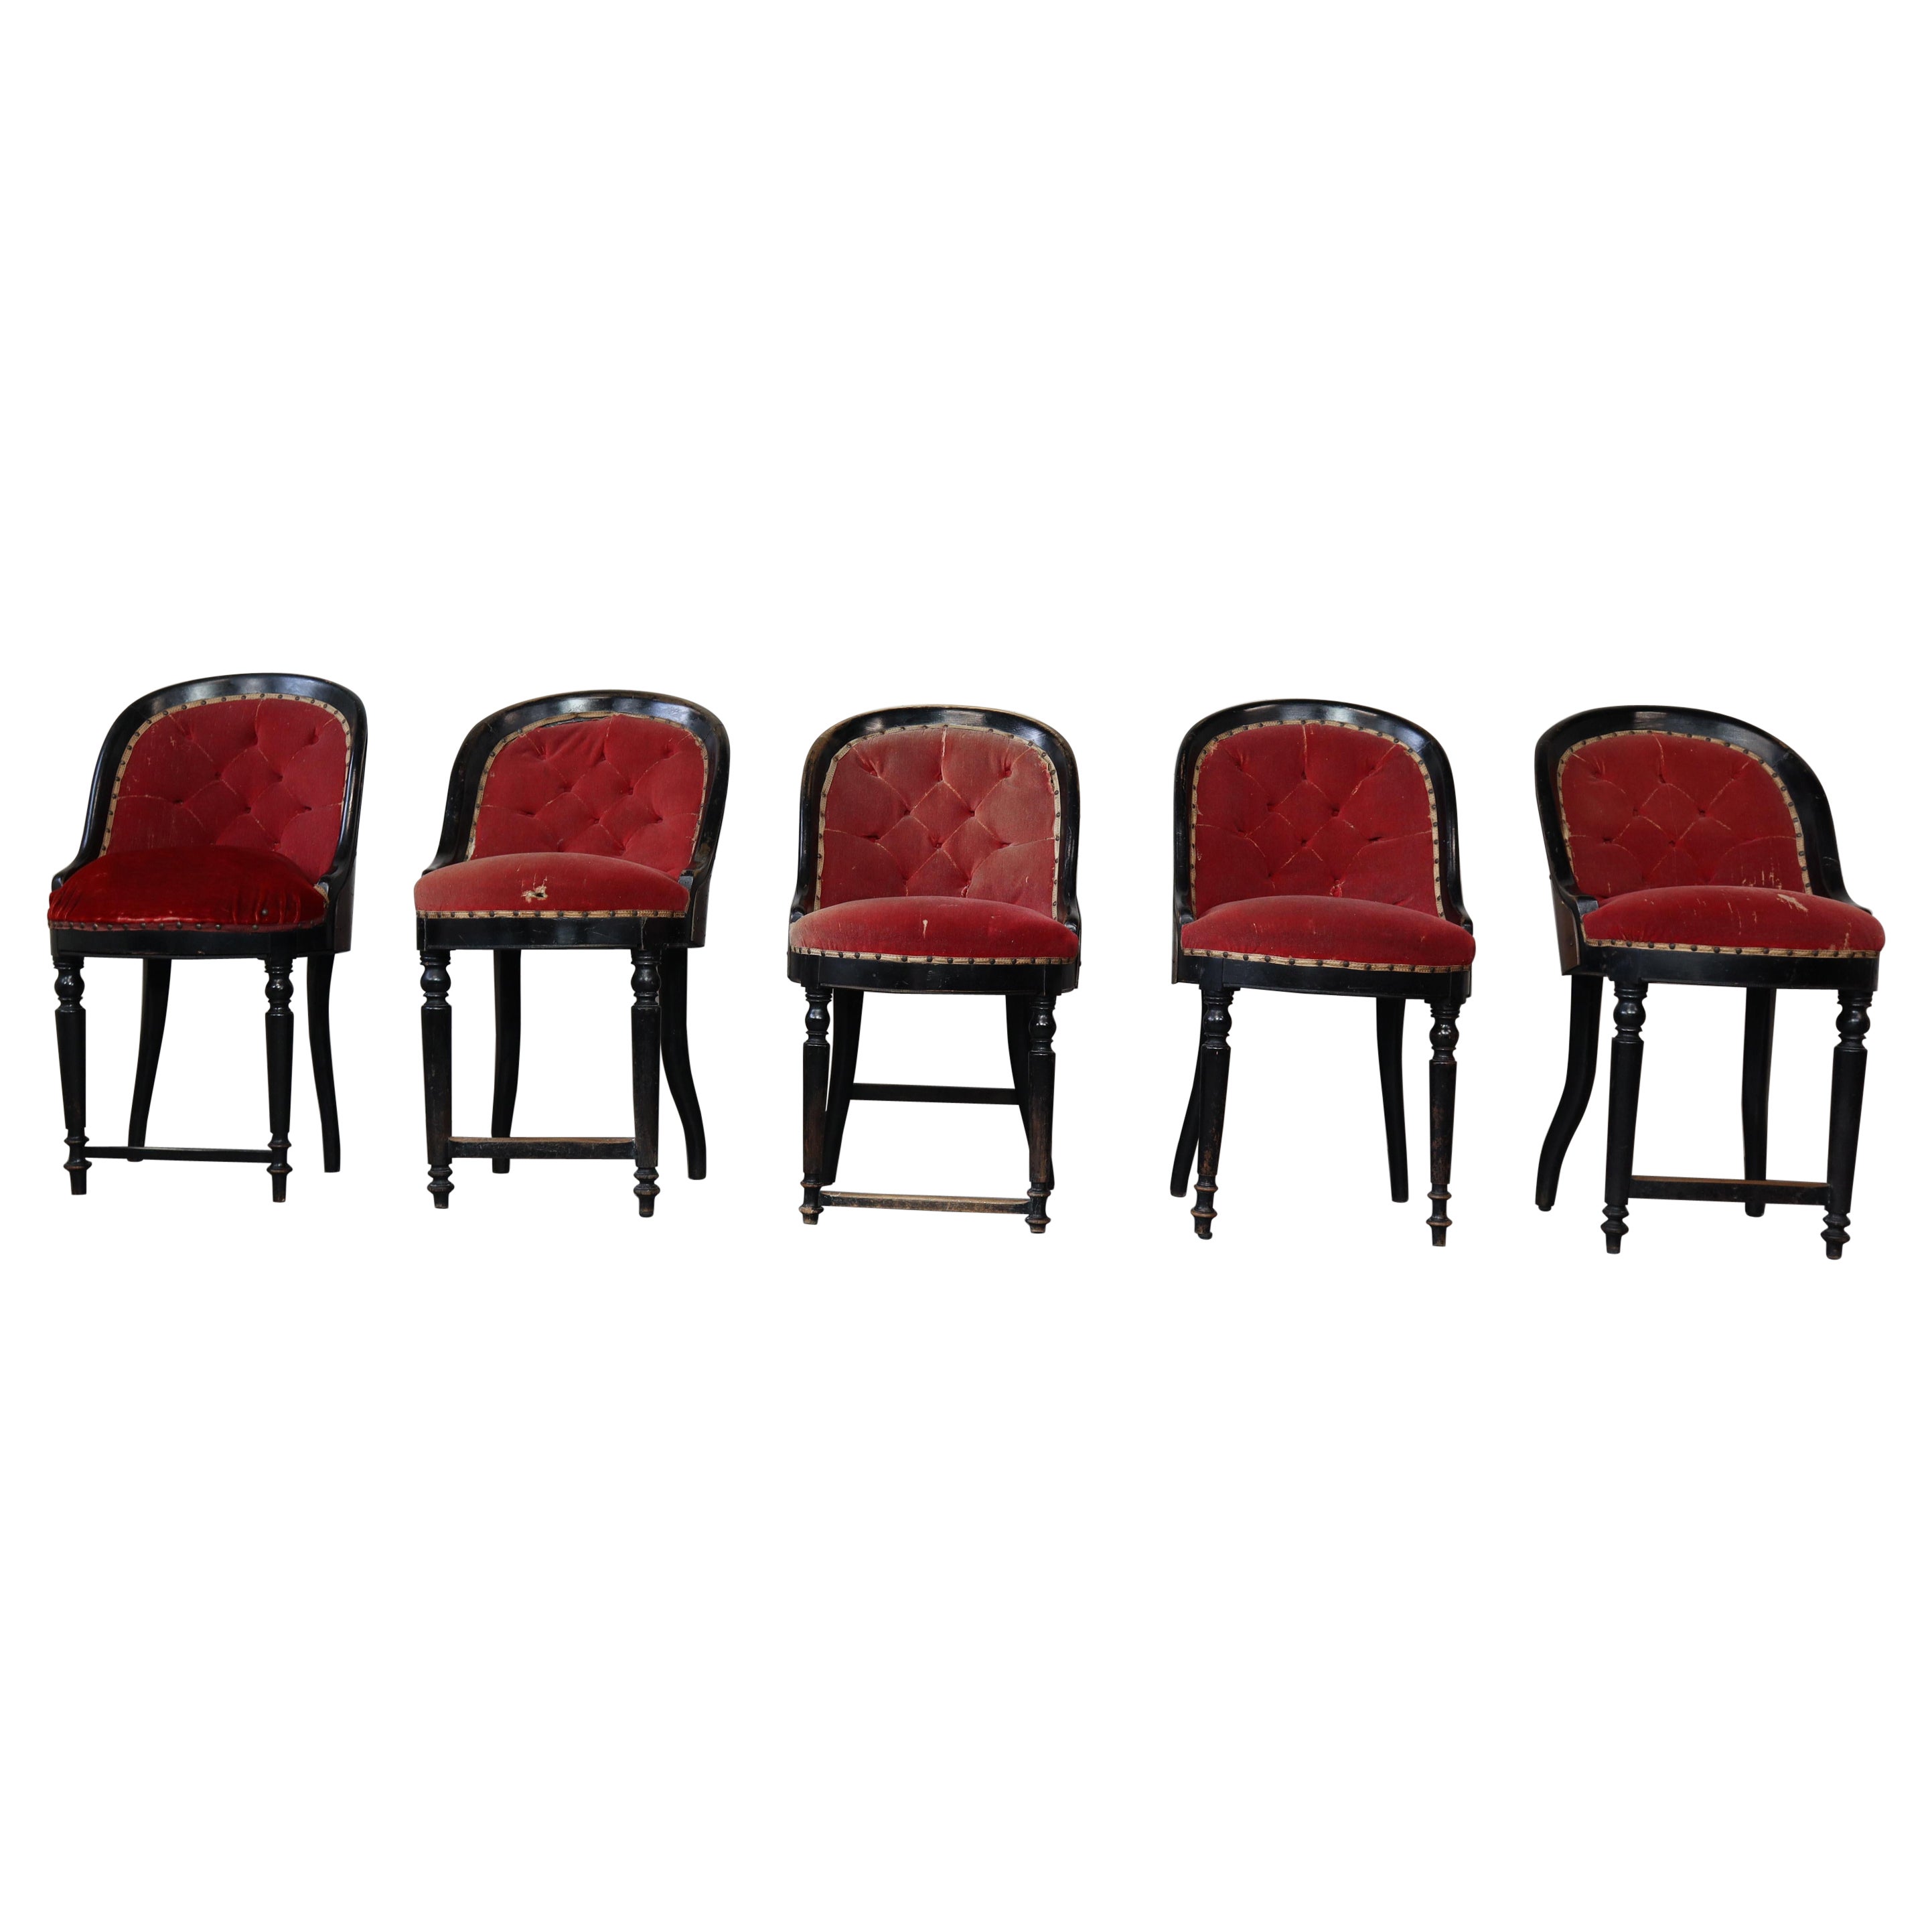 Set of Five Antique Theater Chairs